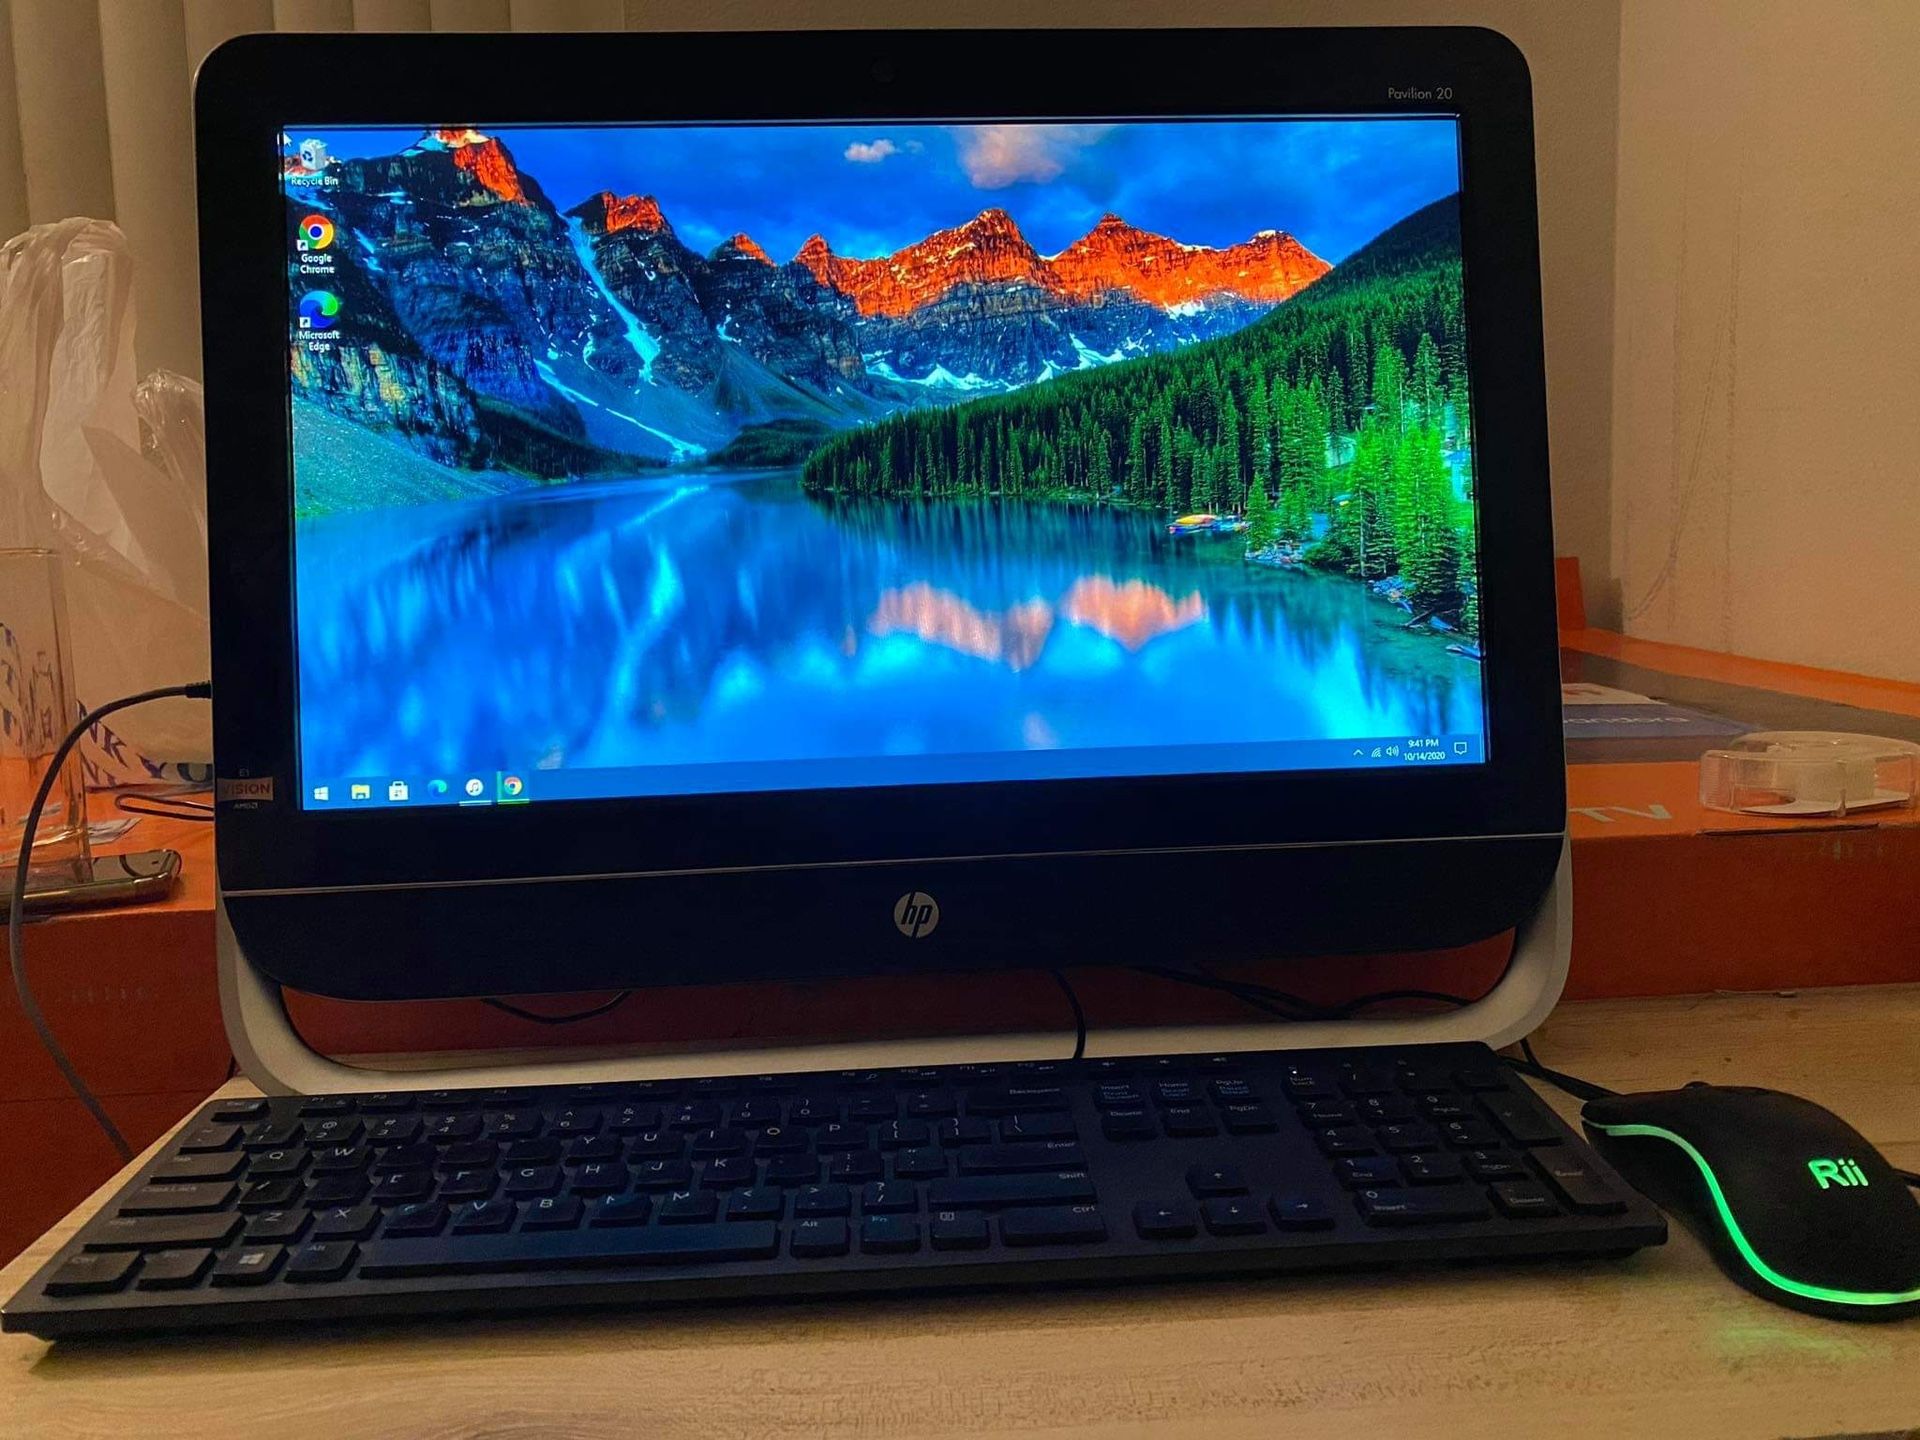 HP Pavilion all in one PC computer 20”